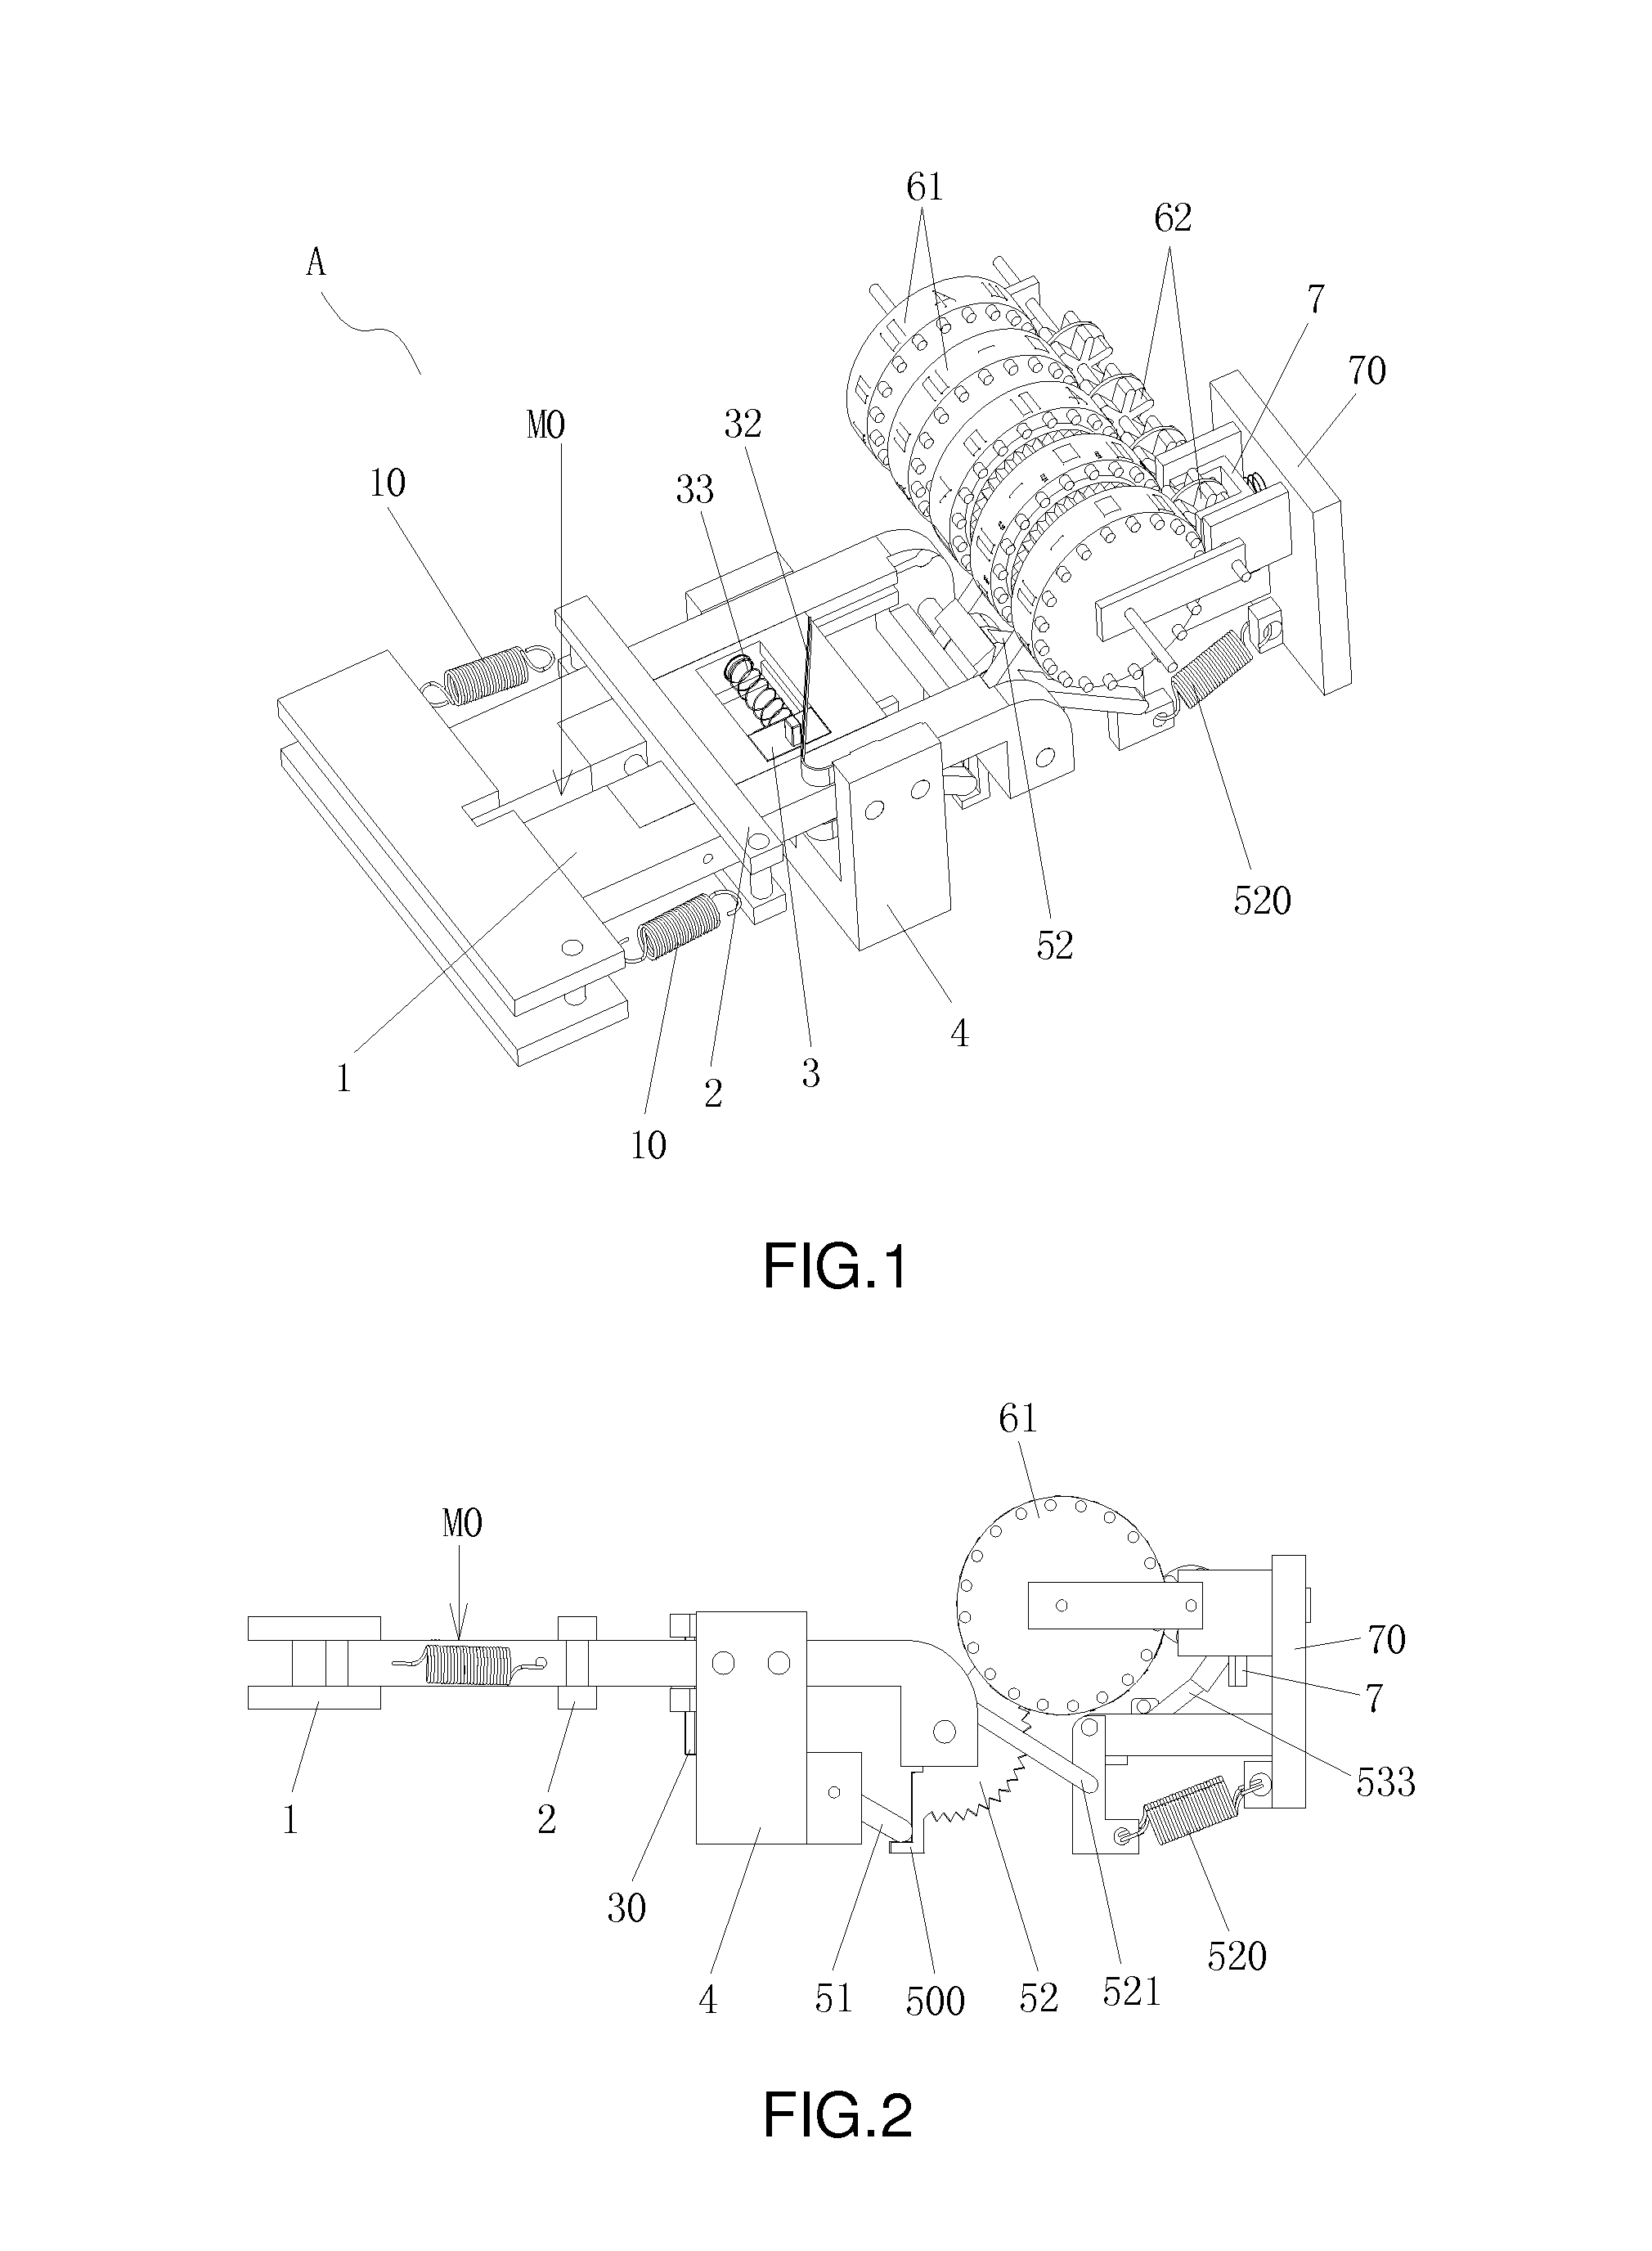 Coin deposit and summation memory device